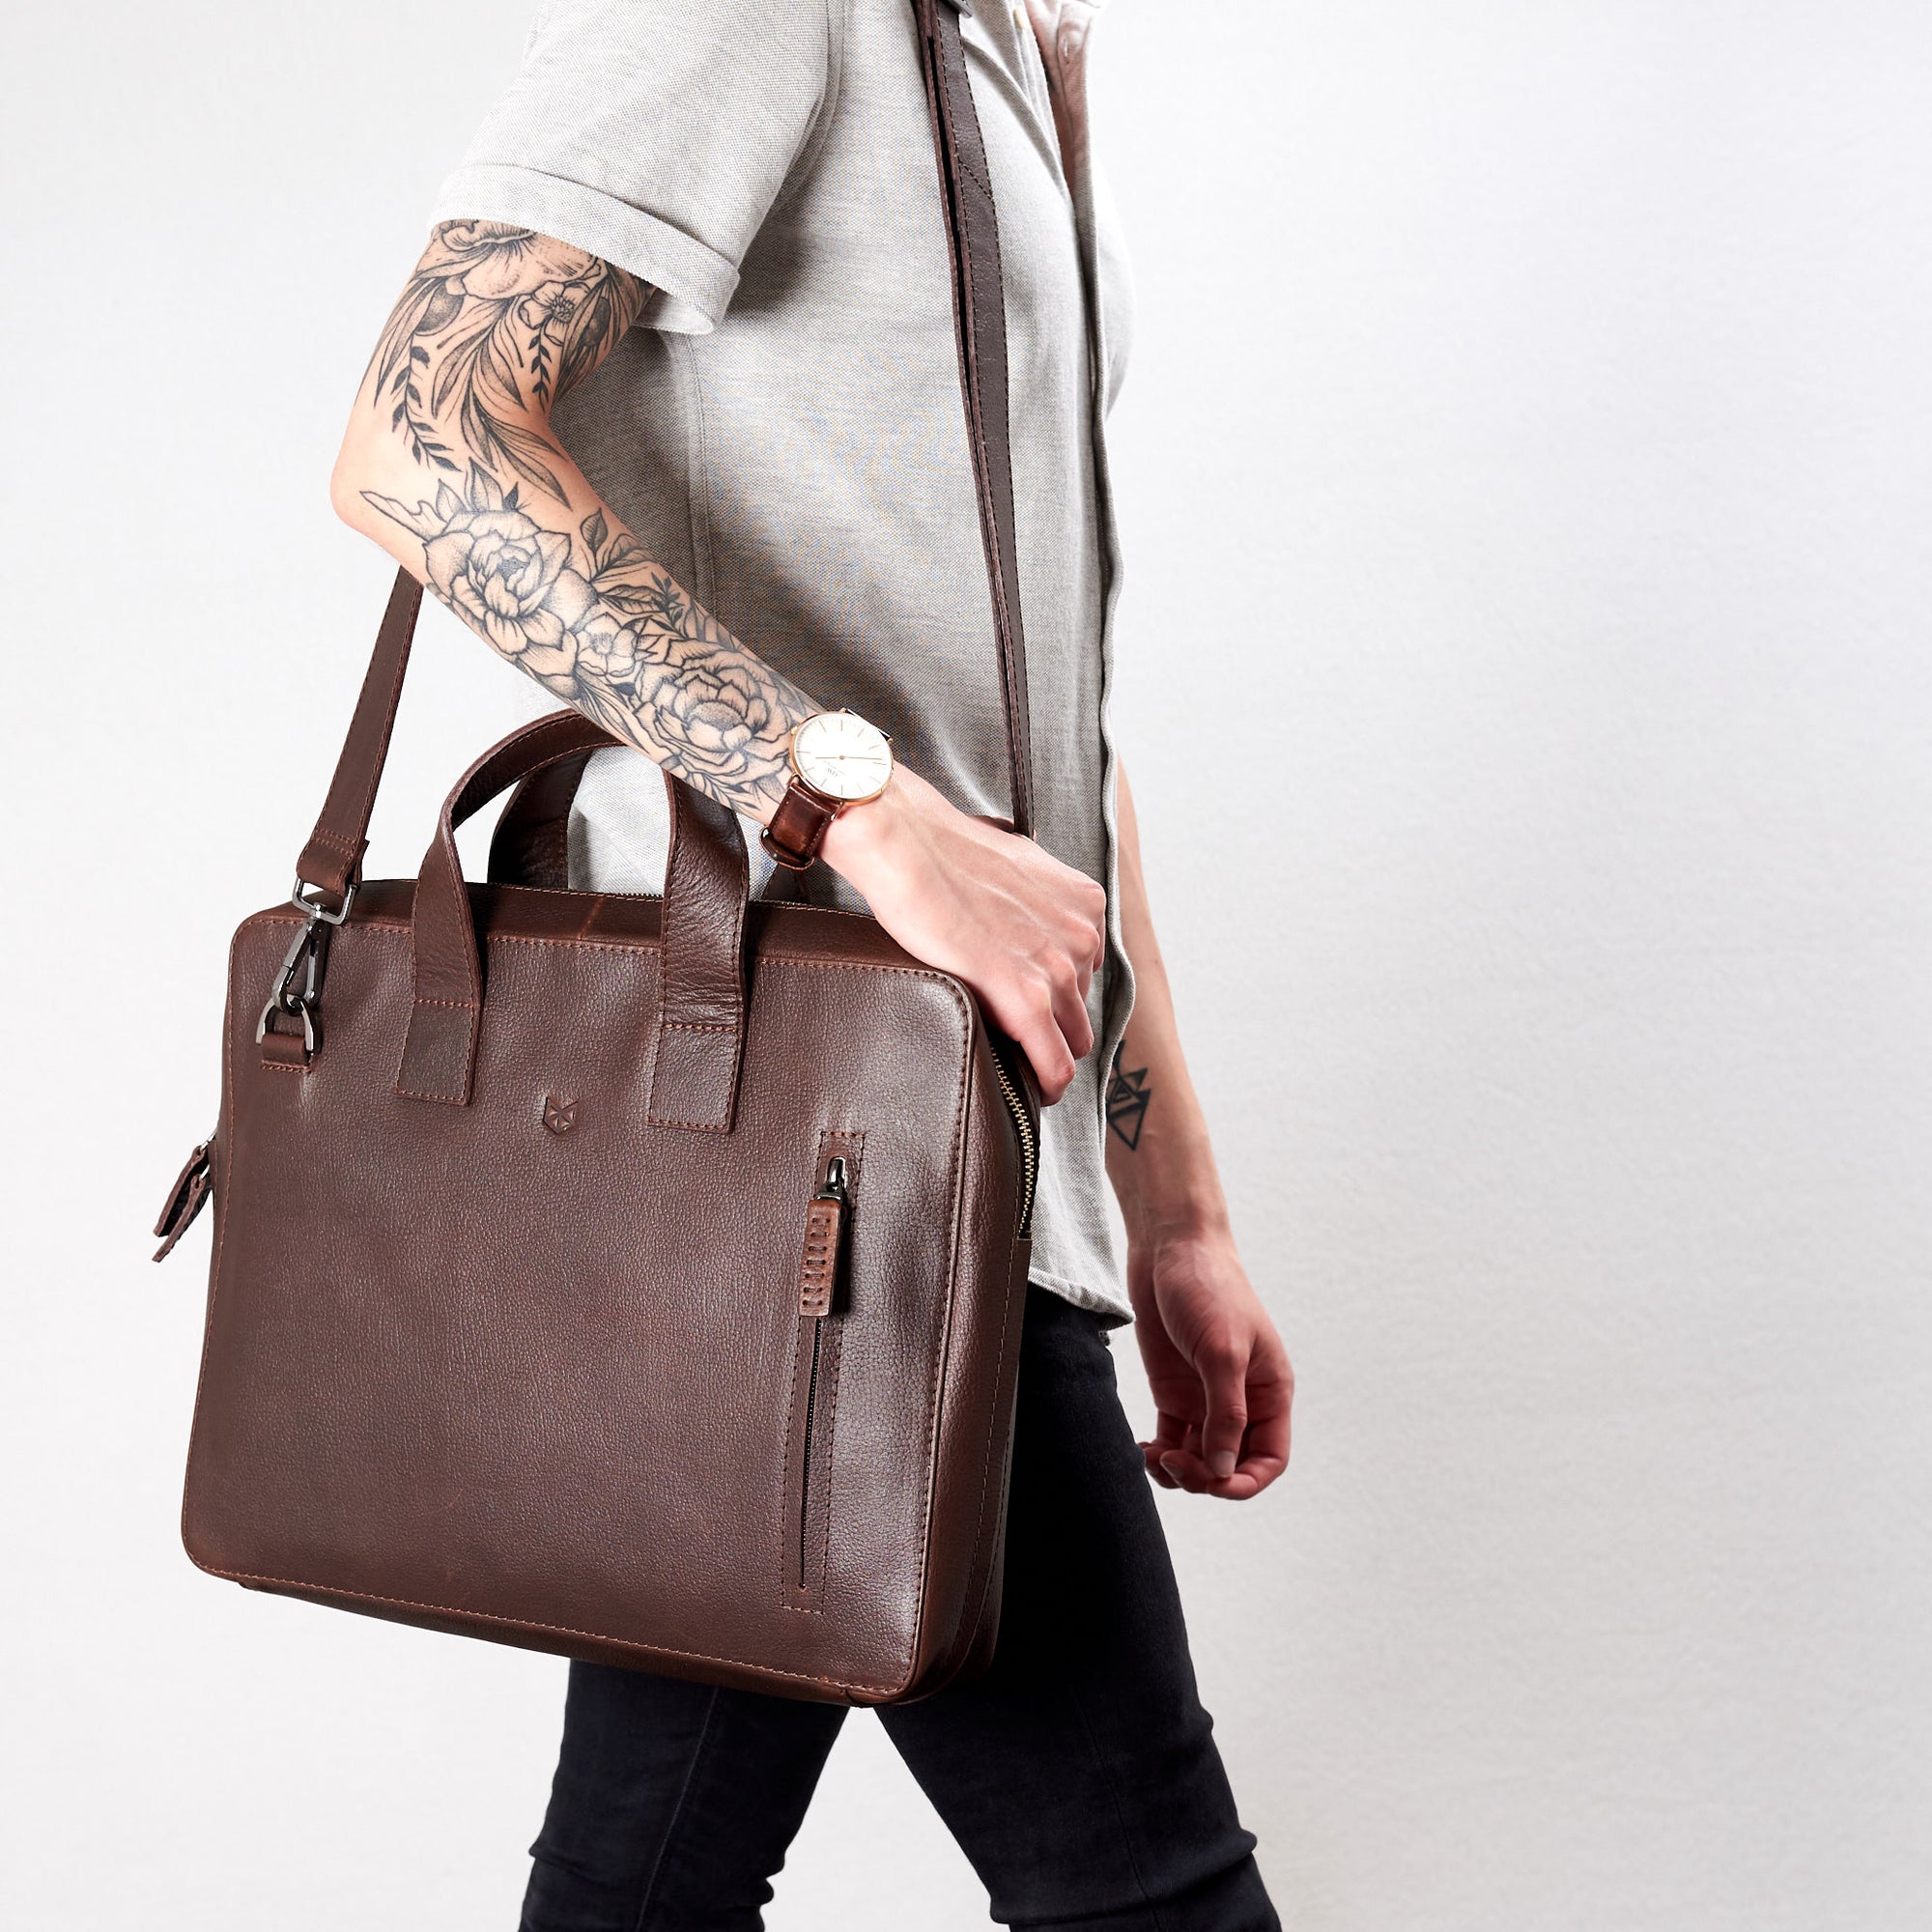 Style walking with Roko. Dark brown briefcase by Capra Leather.